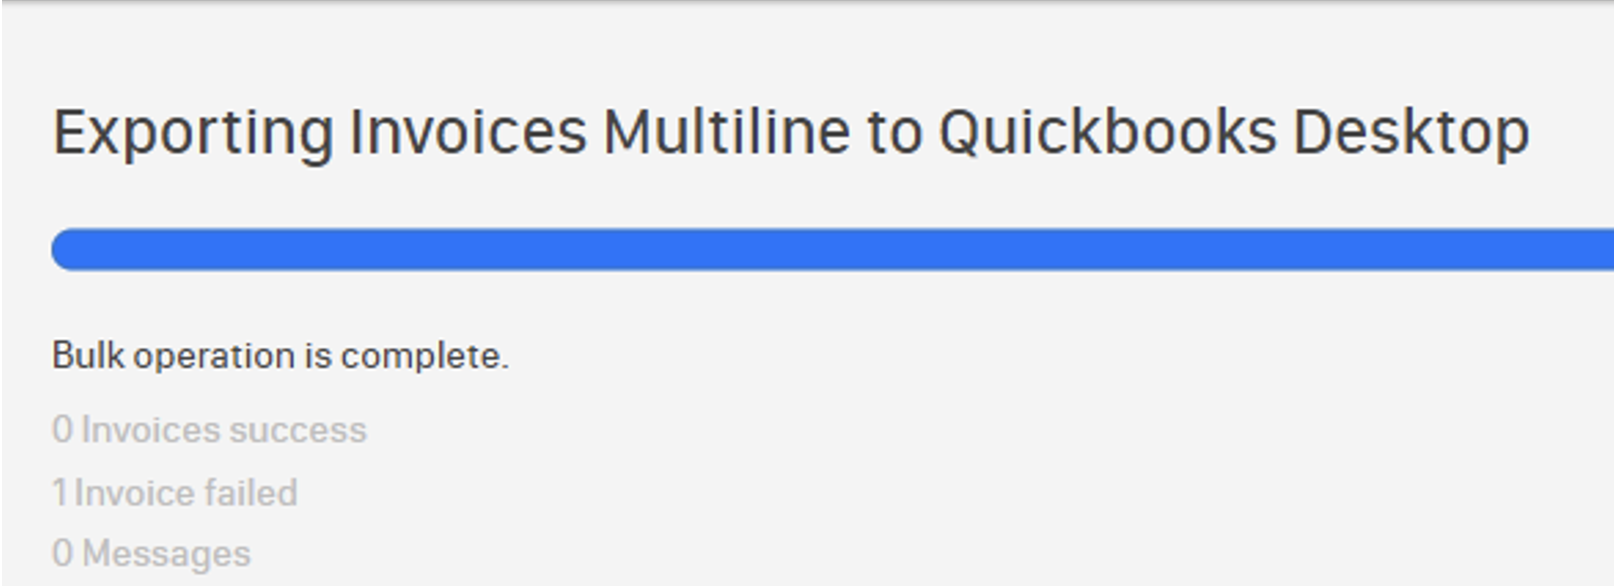 Exporting_invoices_multiline_to_Qbd.png